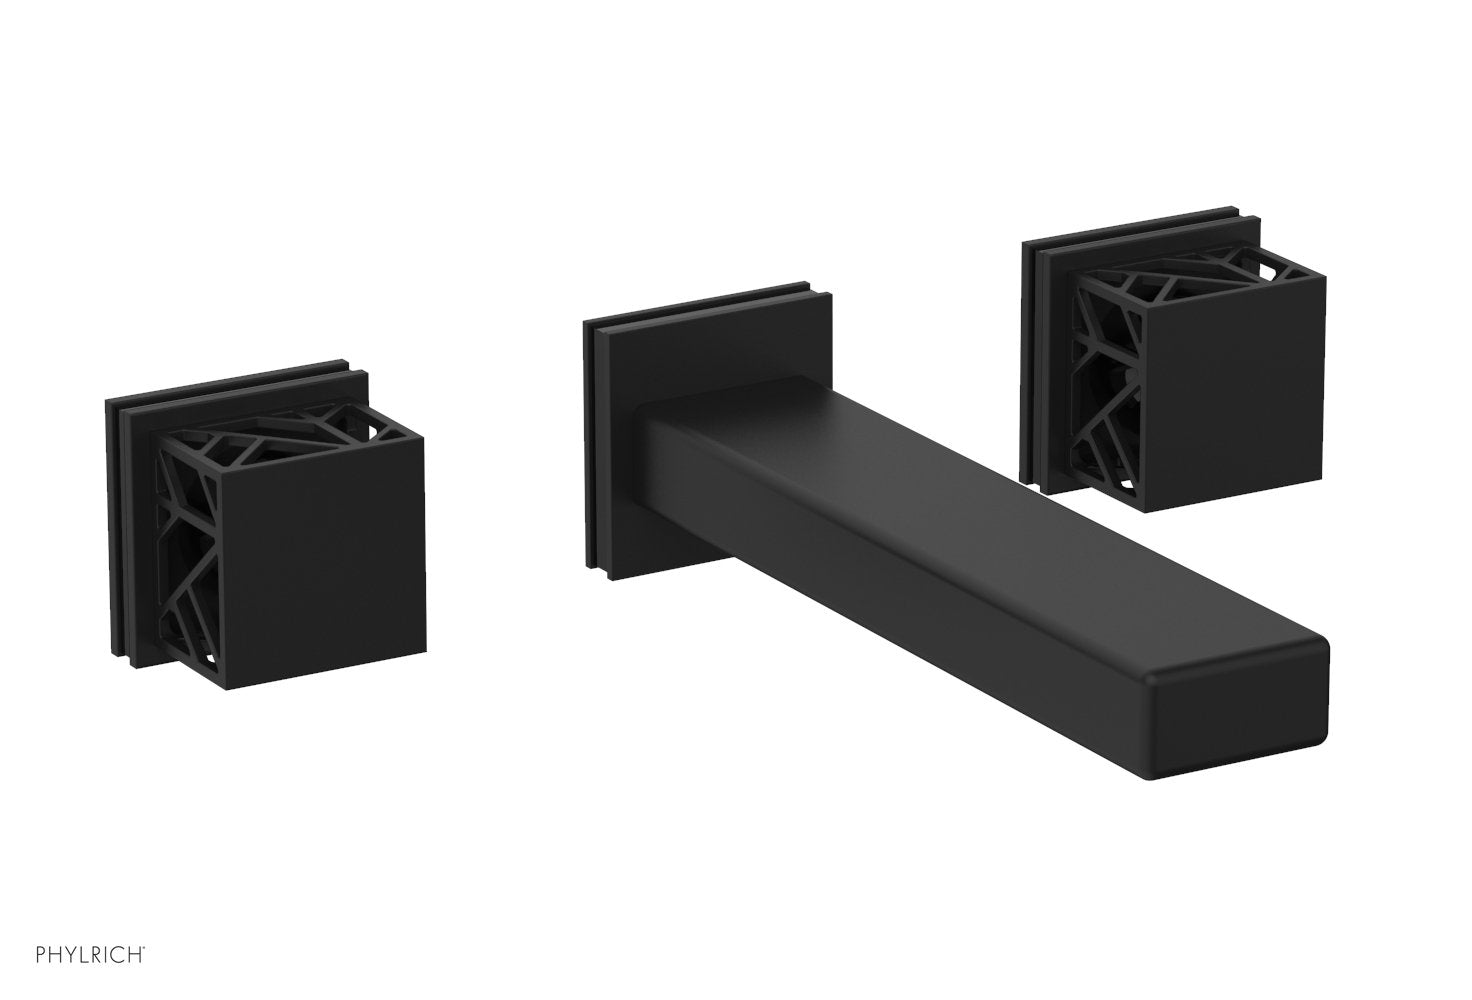 Phylrich JOLIE Wall Tub Set - Square Handles with "Black" Accents